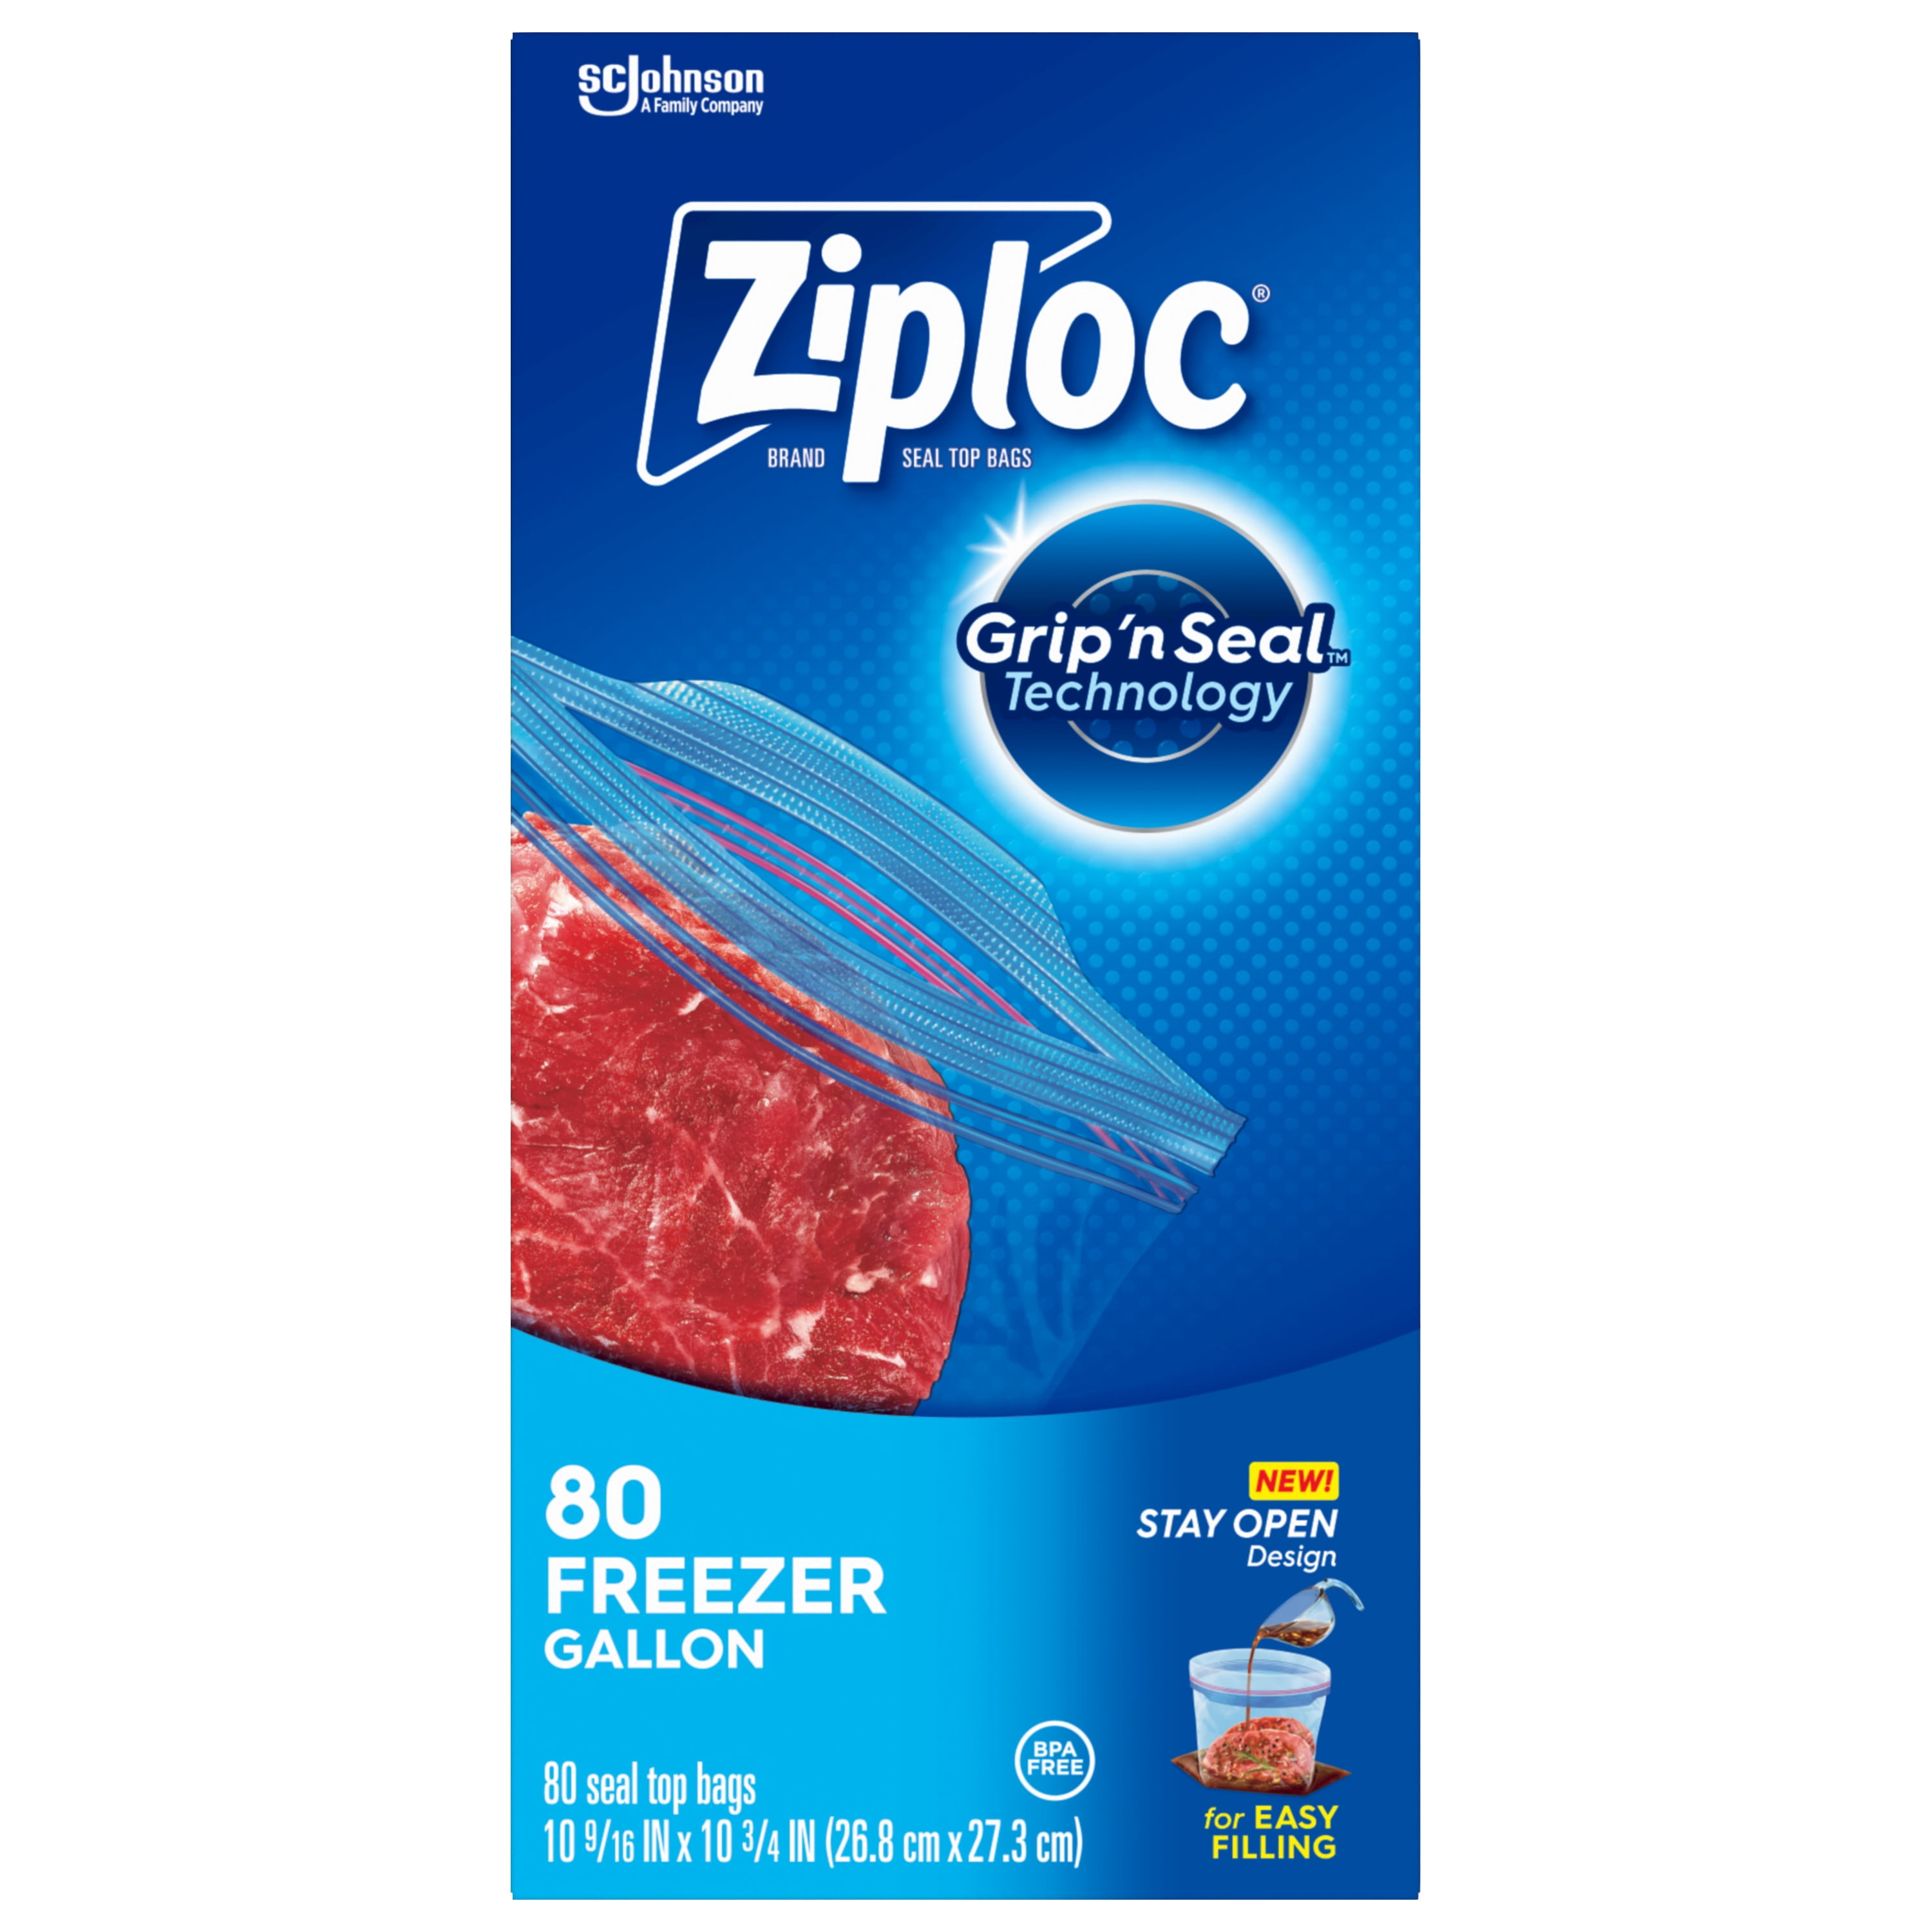 Ziploc Two Gallon Food Storage Freezer Bags, Grip 'n Seal Technology for  Easier Grip, Open, and